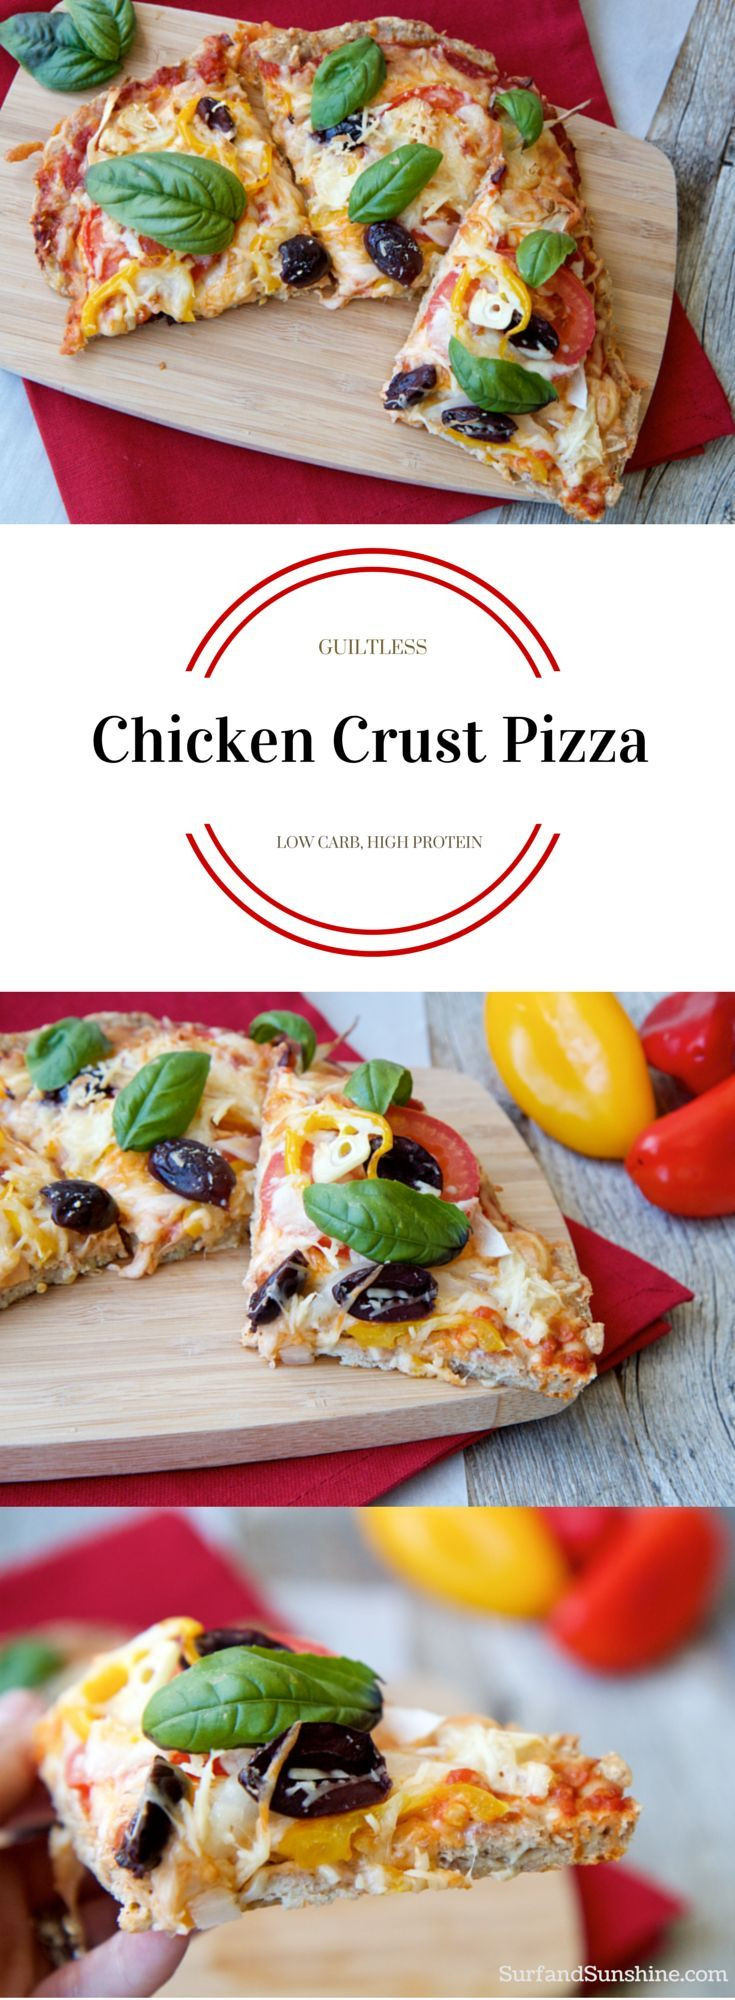 Healthy Low Carb High Protein Recipes
 Guilt Free Chicken Crust Pizza Receta